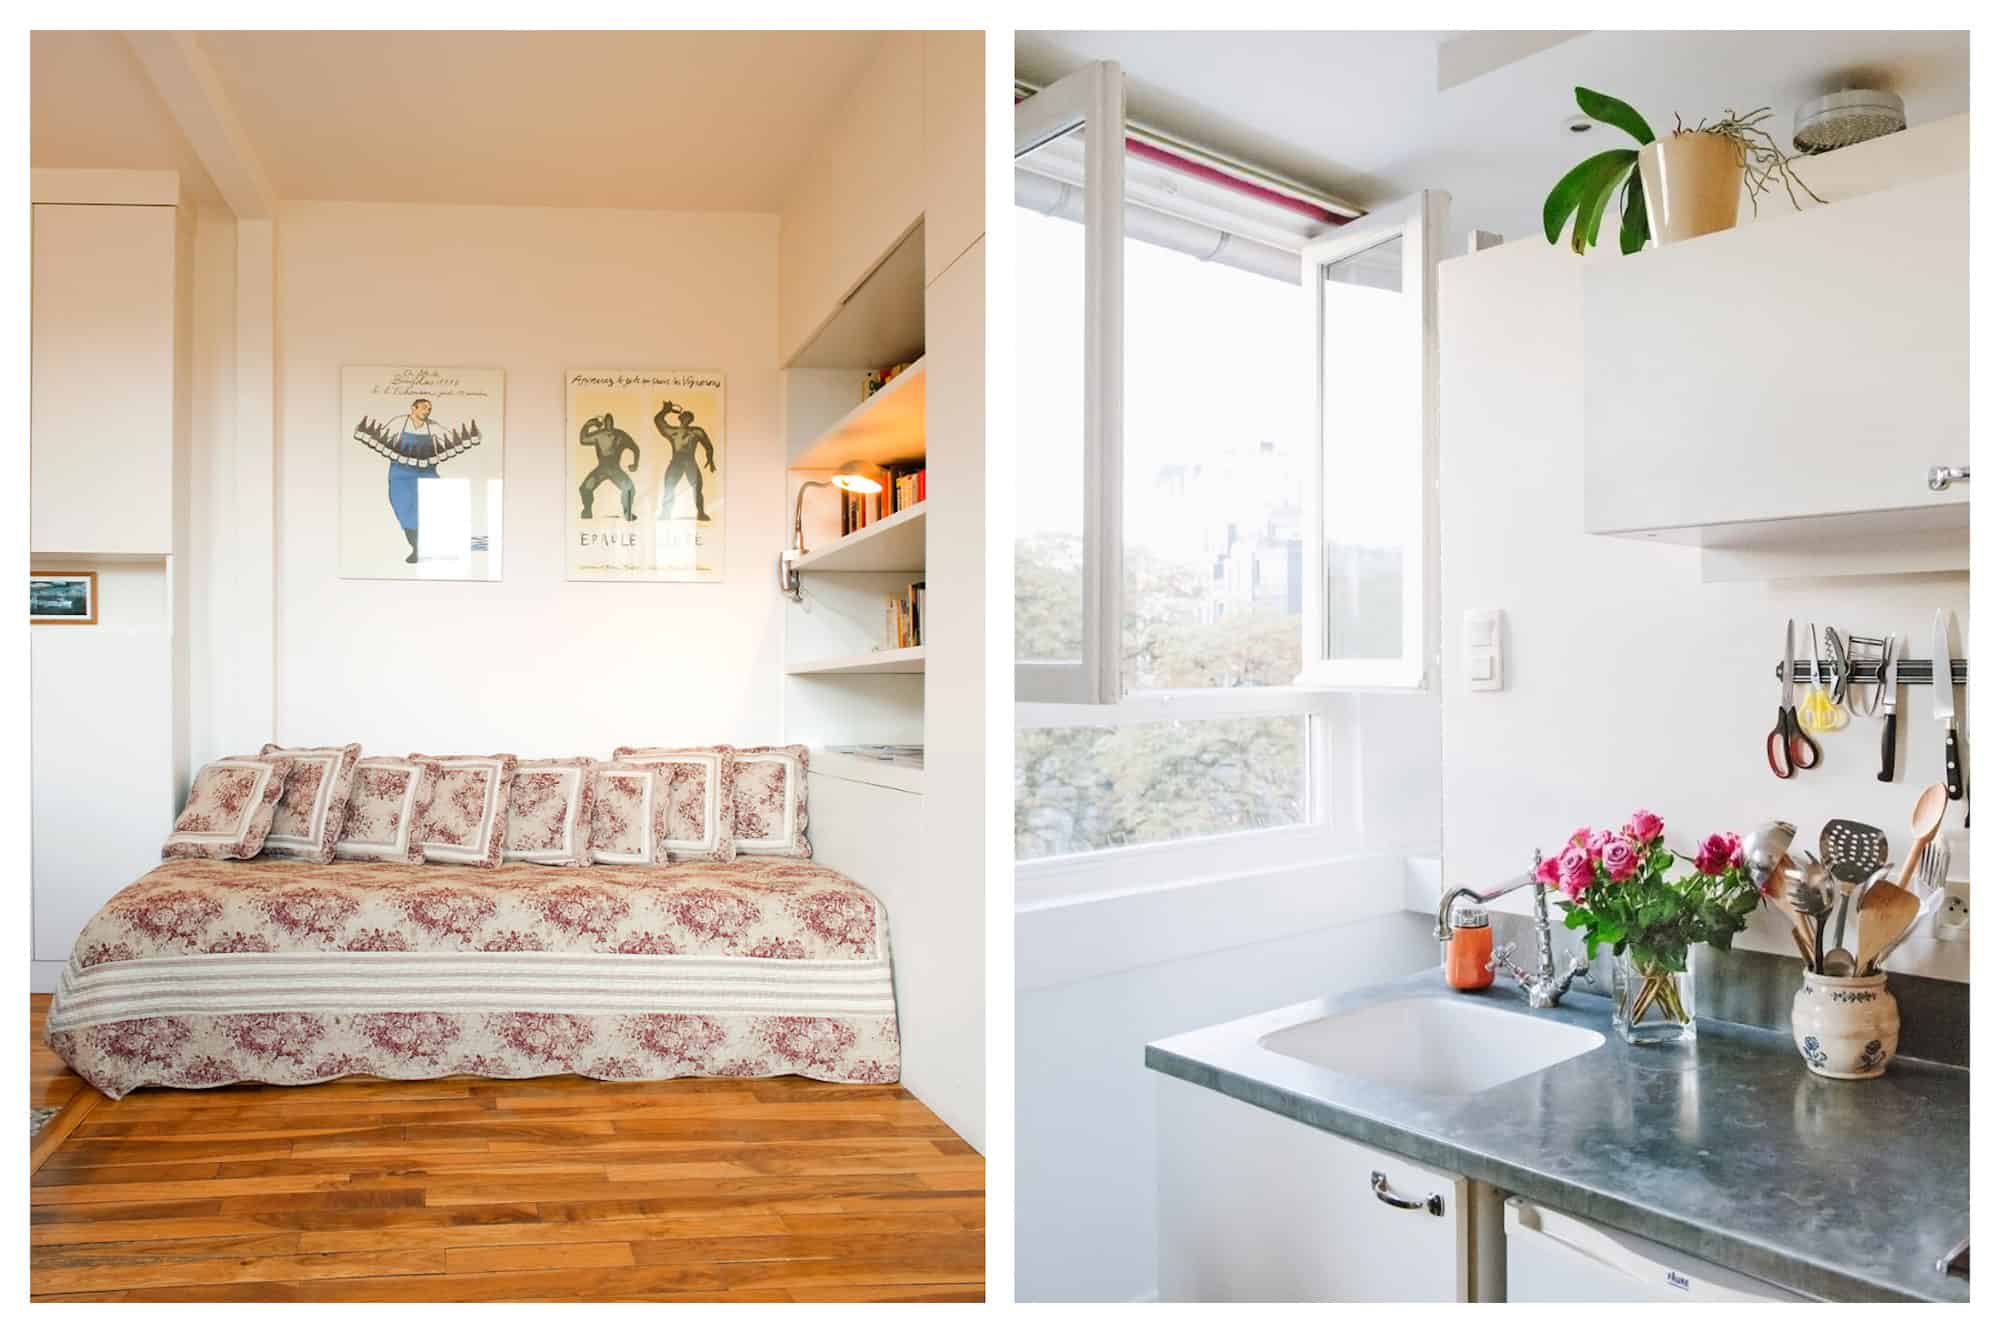 A studio for rent in Paris in Montmartre with a comfy fold-out sofa bed (left). The open window of a kitchen in a rental apartment in Paris (right).